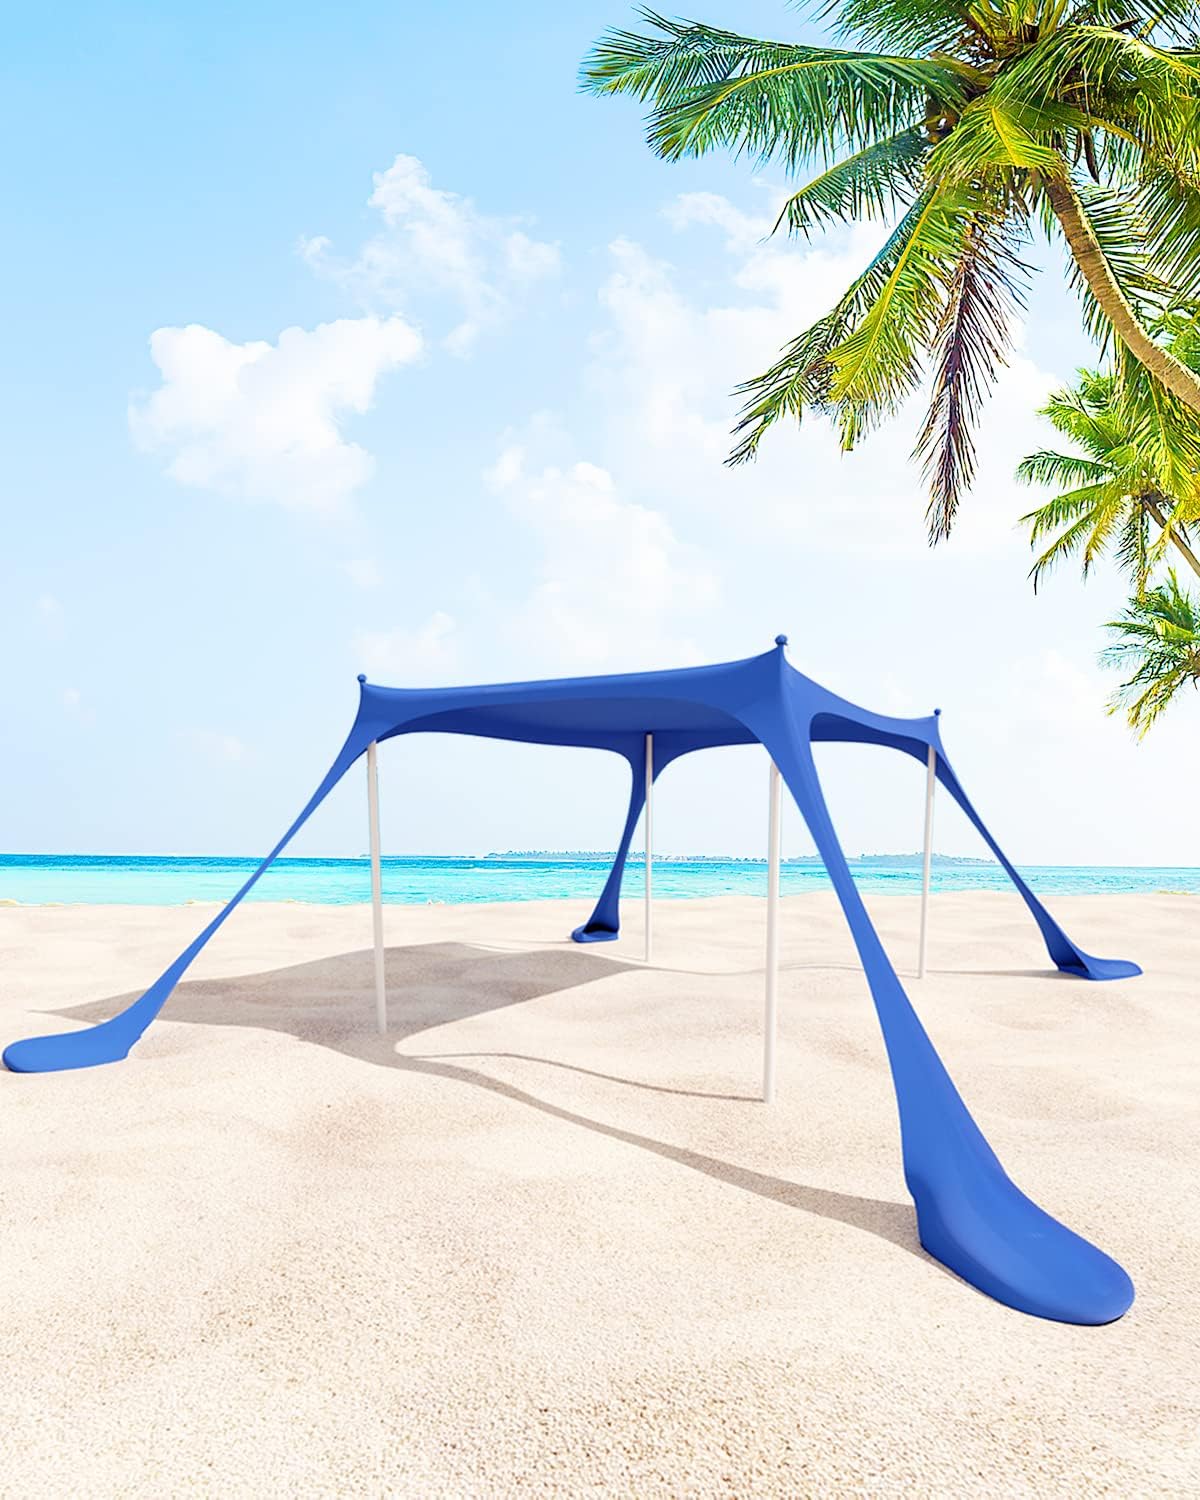 Fuairmee Beach Tent Sun Shelter, 10x10FT Beach Tent Sun Shade Canopy UPF 50+ UV Protection, Easy Set Up Pop Up Outdoor Shade with Portable Carrying Bag